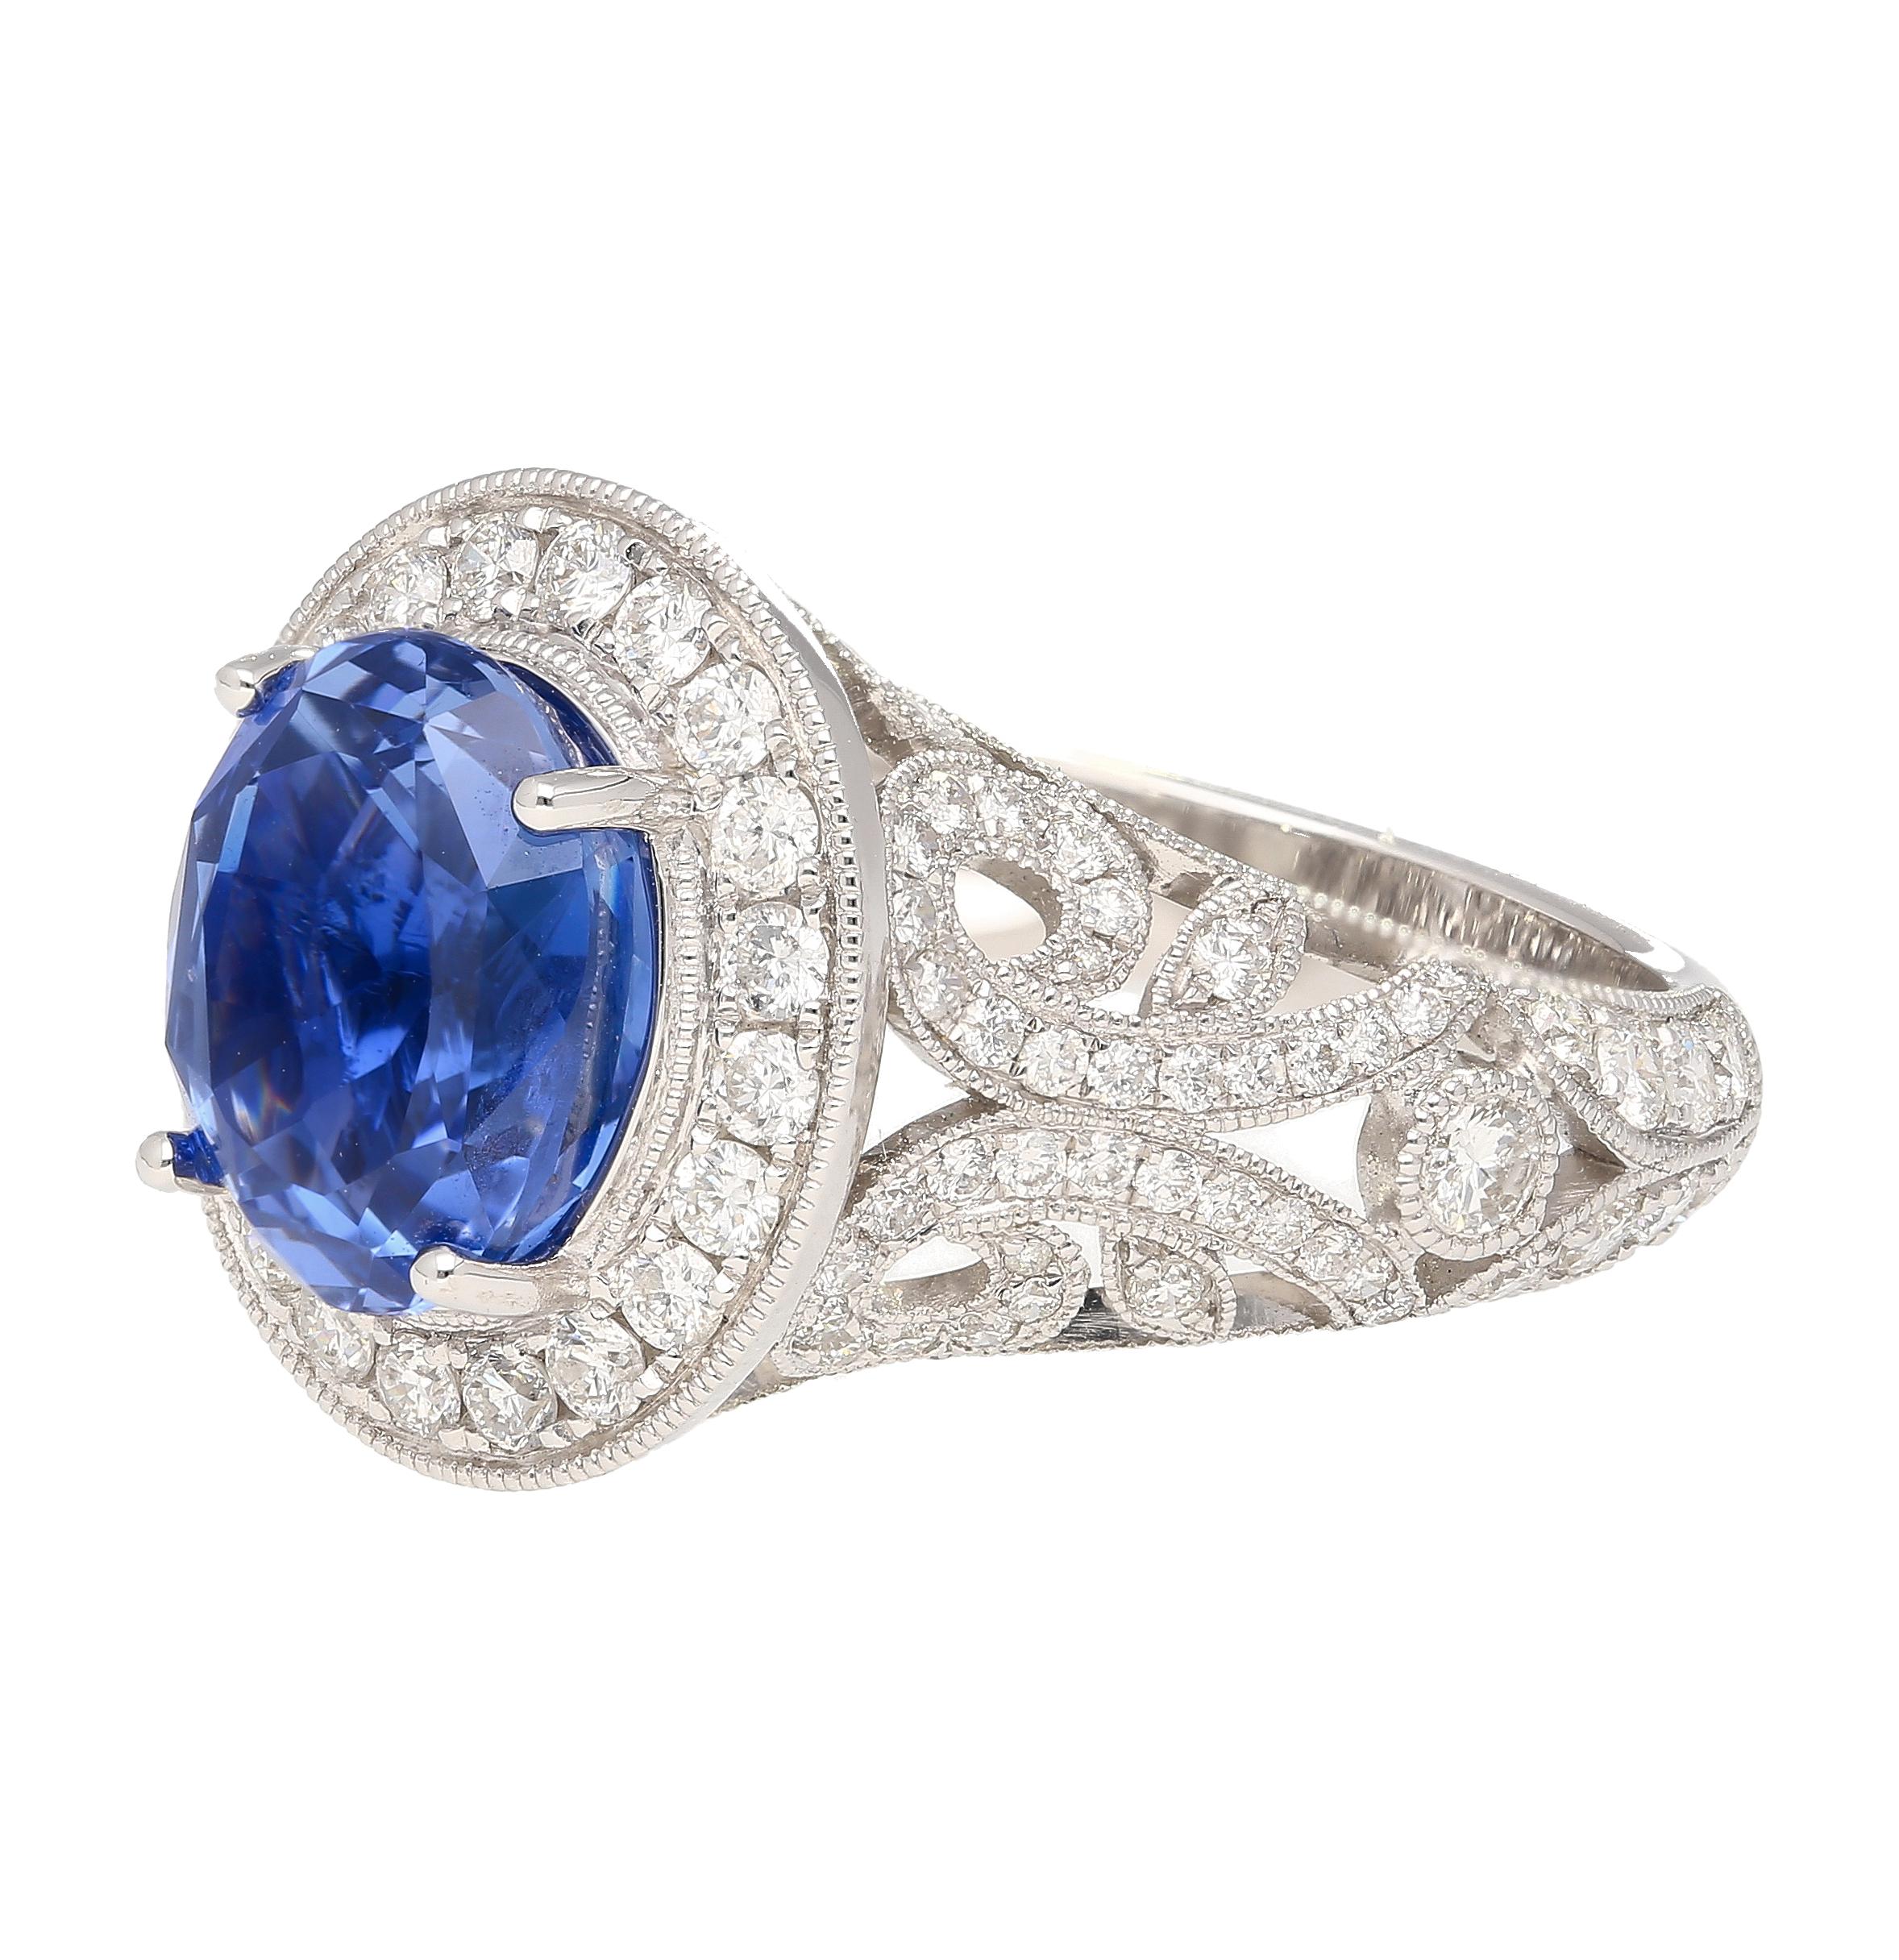 Oval Cut No Heat 4.84 Carat Violet-Blue Ceylon Sapphire with Diamonds in 18K Gold Ring For Sale